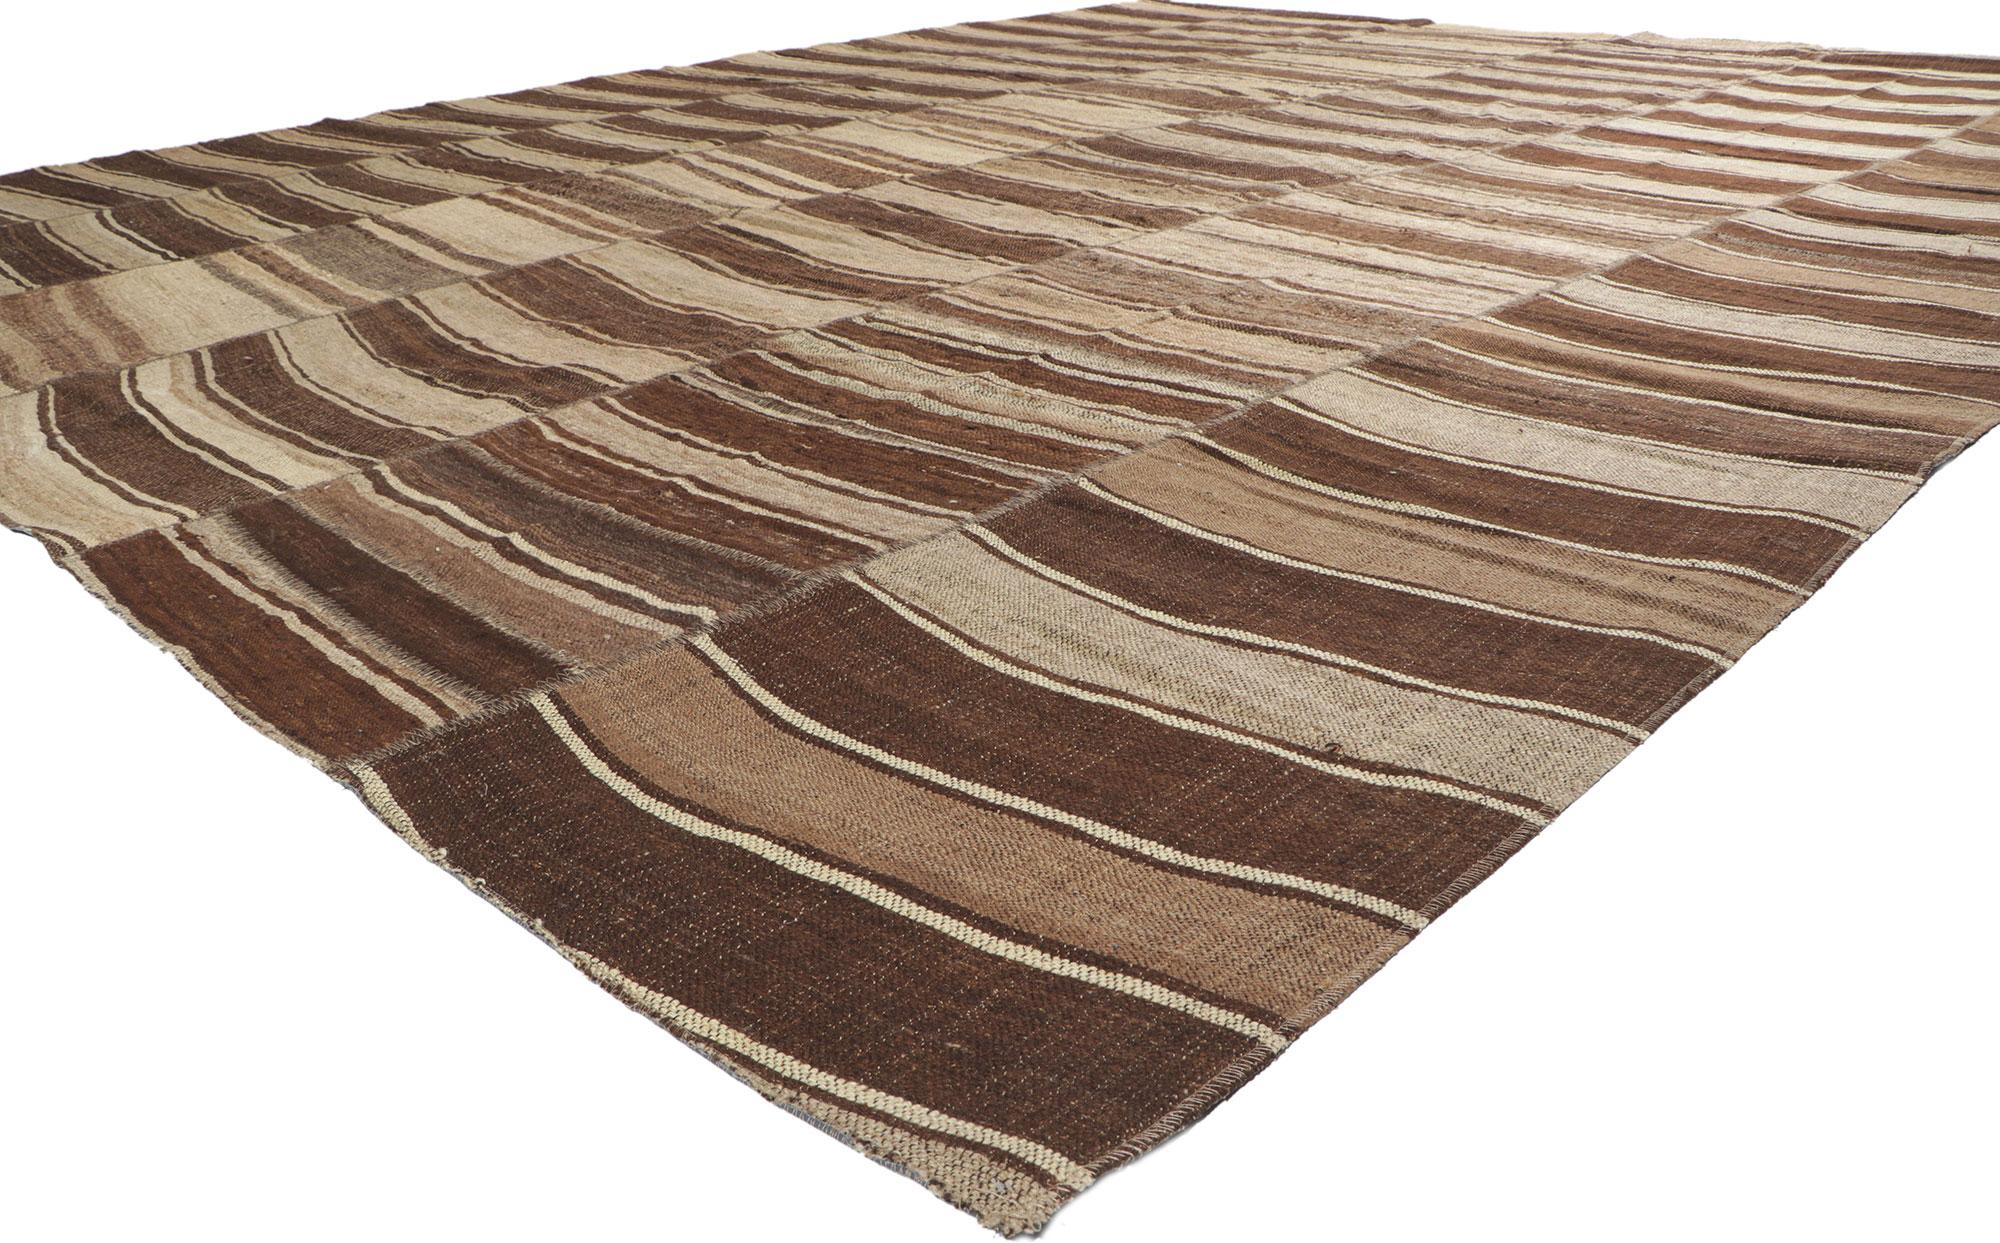 60636 Brown Vintage Striped Turkish Kilim Rug, 12'03 x 15'04. This handwoven wool vintage Turkish kilim rug breathes the spirit of Wabi-Sabi, effortlessly merging with a commitment to sustainable design to birth a masterpiece that harmoniously